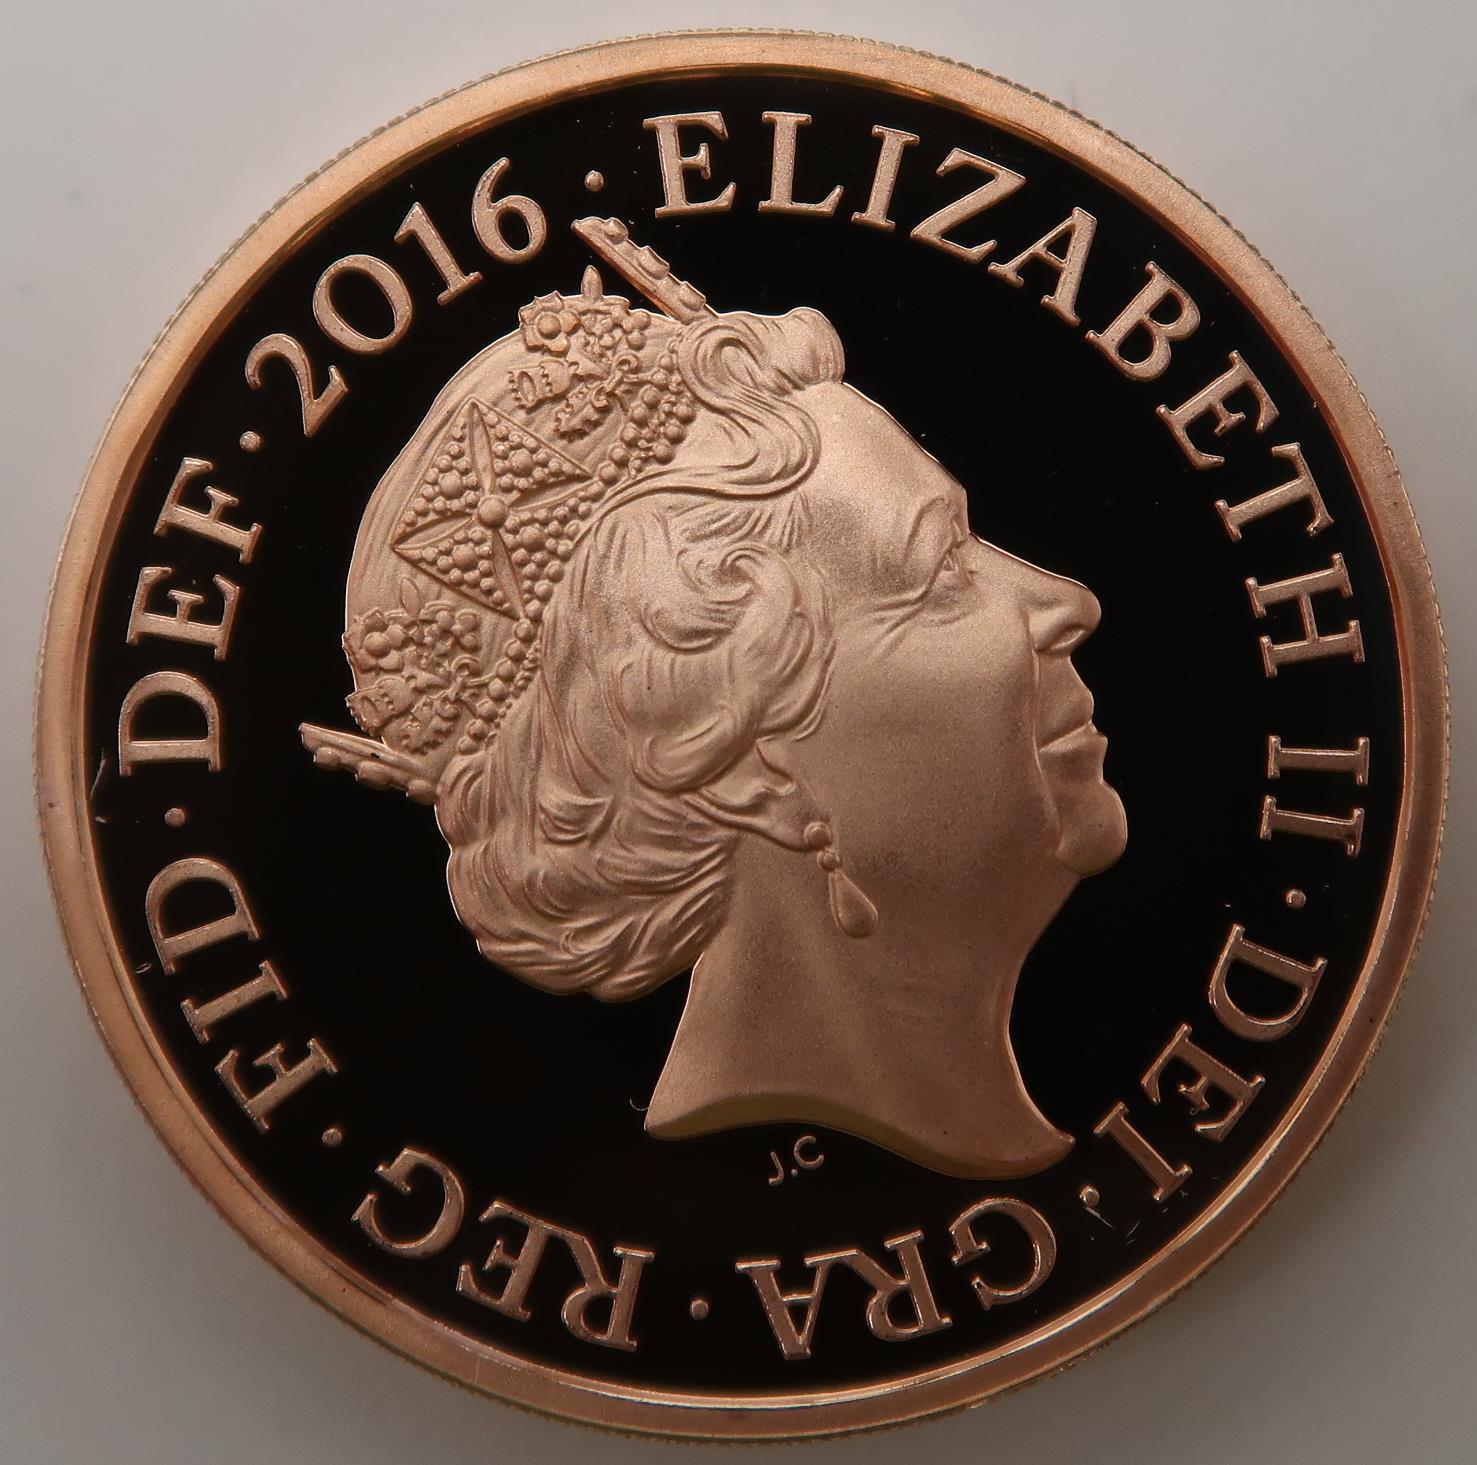 ELIZABETH II Last Round Pound; Royal Mint Gold Proof 2016 Obverse fifth crowned portrait of HM Queen - Image 5 of 5